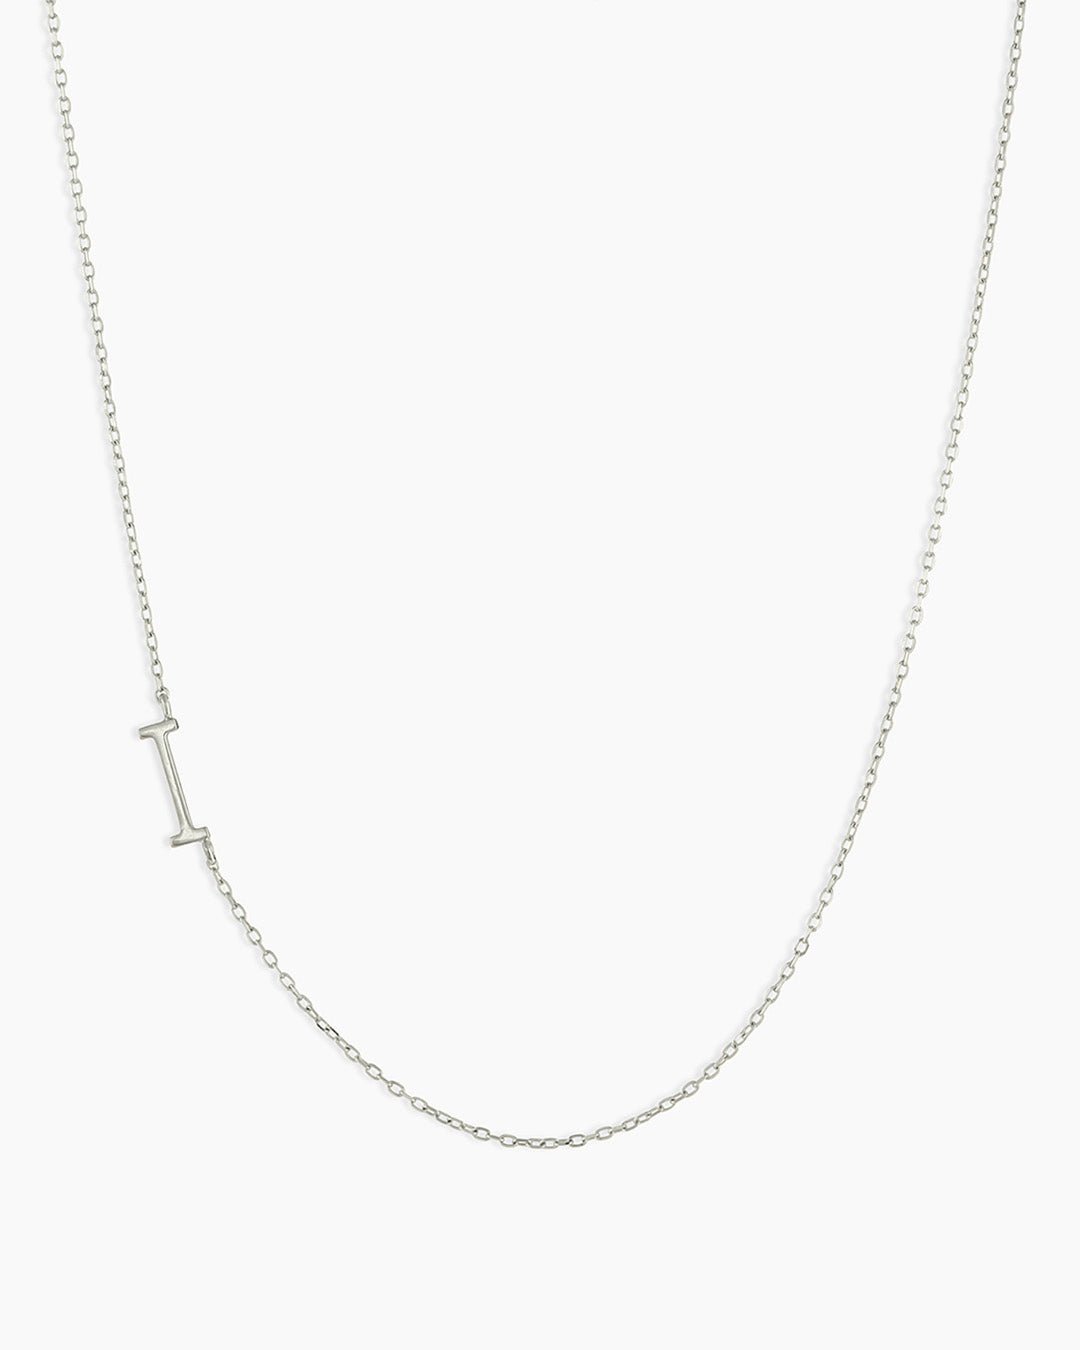 Woman wearing Alphabet Necklace || option::14k Solid White Gold, I